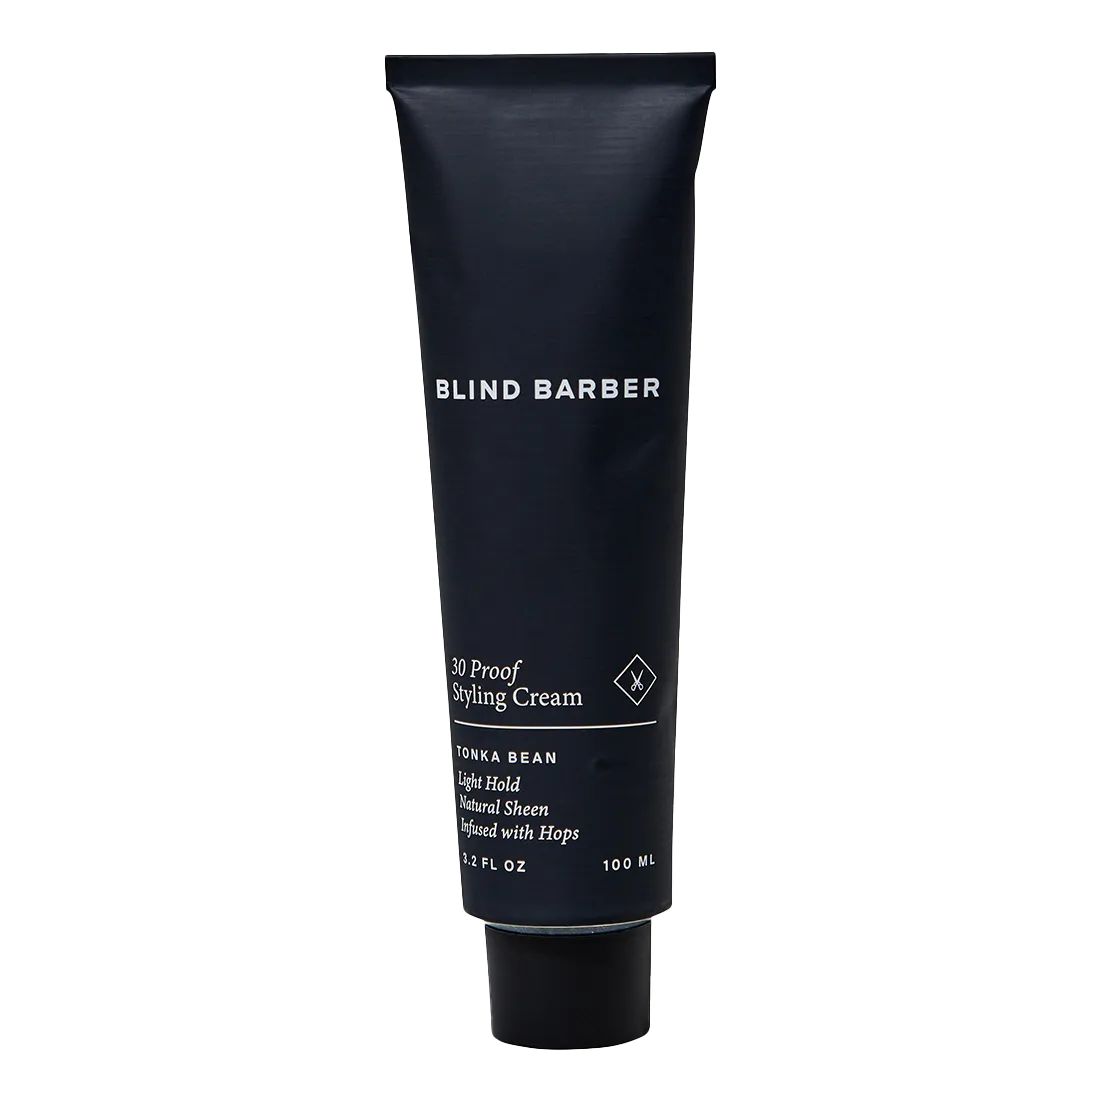 Blind Barber 30 Proof Styling Cream 